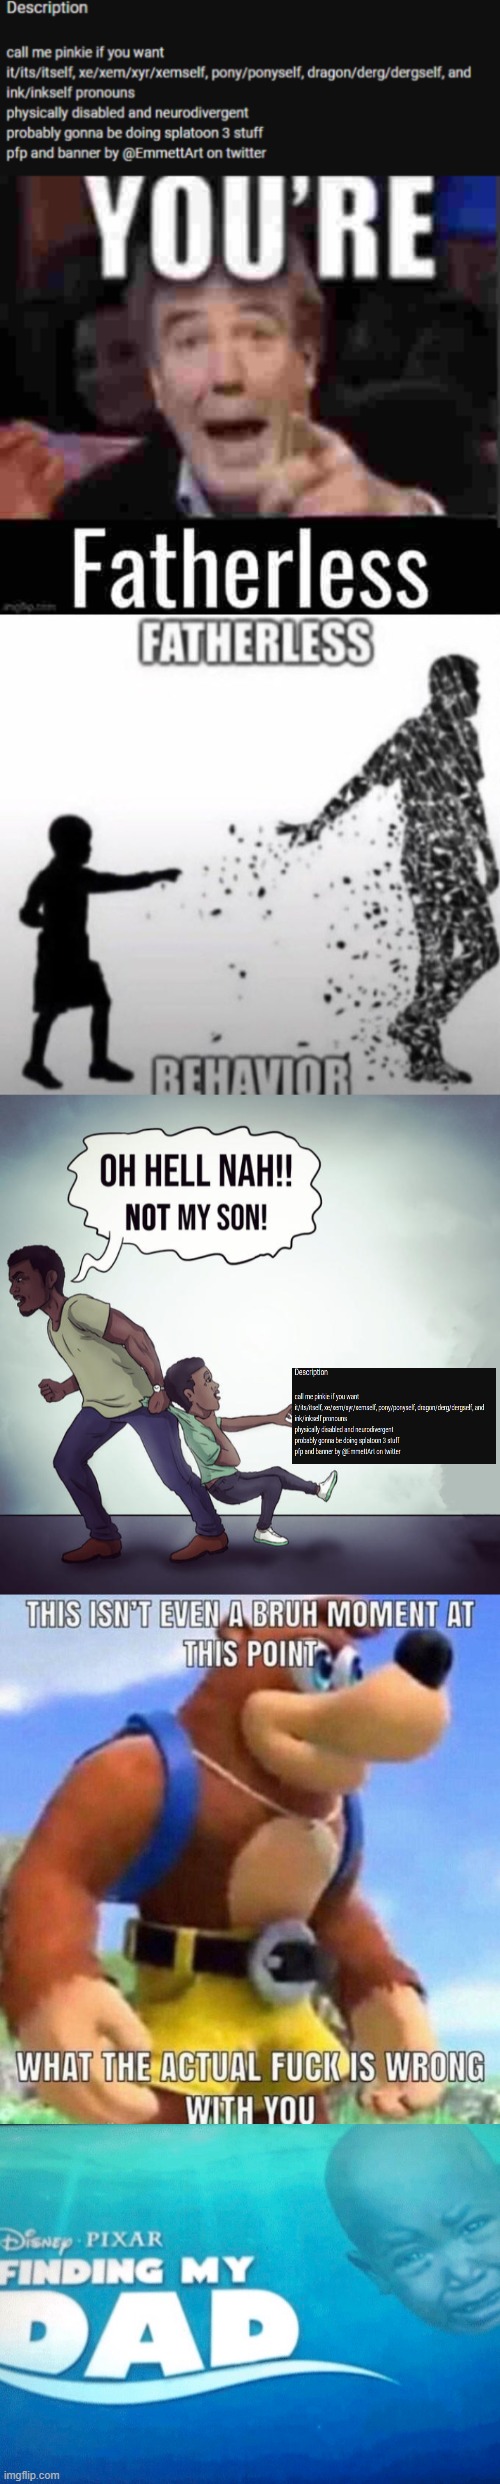 AAAAAAAAAAAAAAAAAAAAAAAAAAAAAAAAAAAAAAAAAAAAA | image tagged in you re fatherless,fatherless behavior,oh hell nah not my son,this isnt even a bruh moment at this point,finding my dad | made w/ Imgflip meme maker